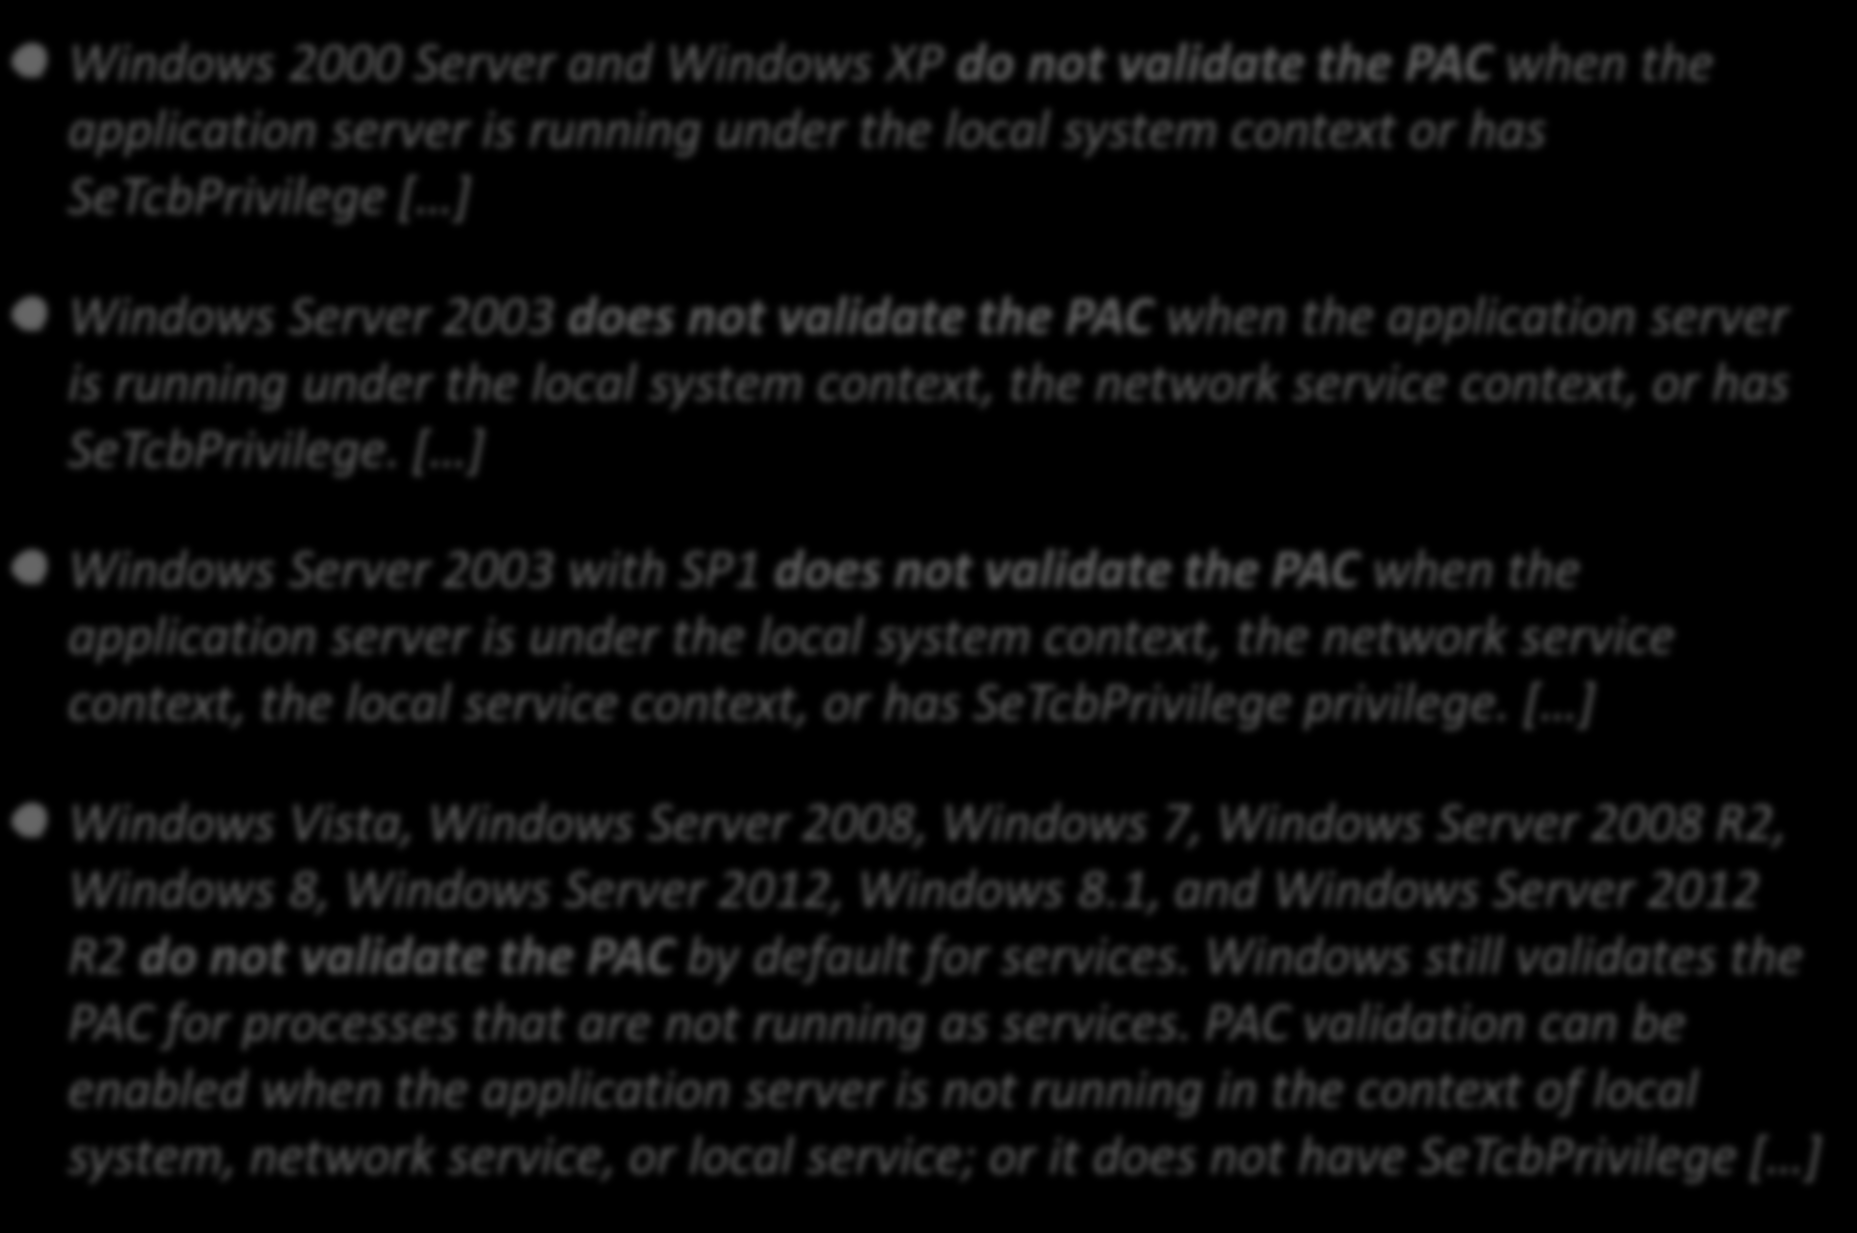 PAC Signature Windows 2000 Server and Windows XP do not validate the PAC when the application server is running under the local system context or has SeTcbPrivilege [ ] Windows Server 2003 does not